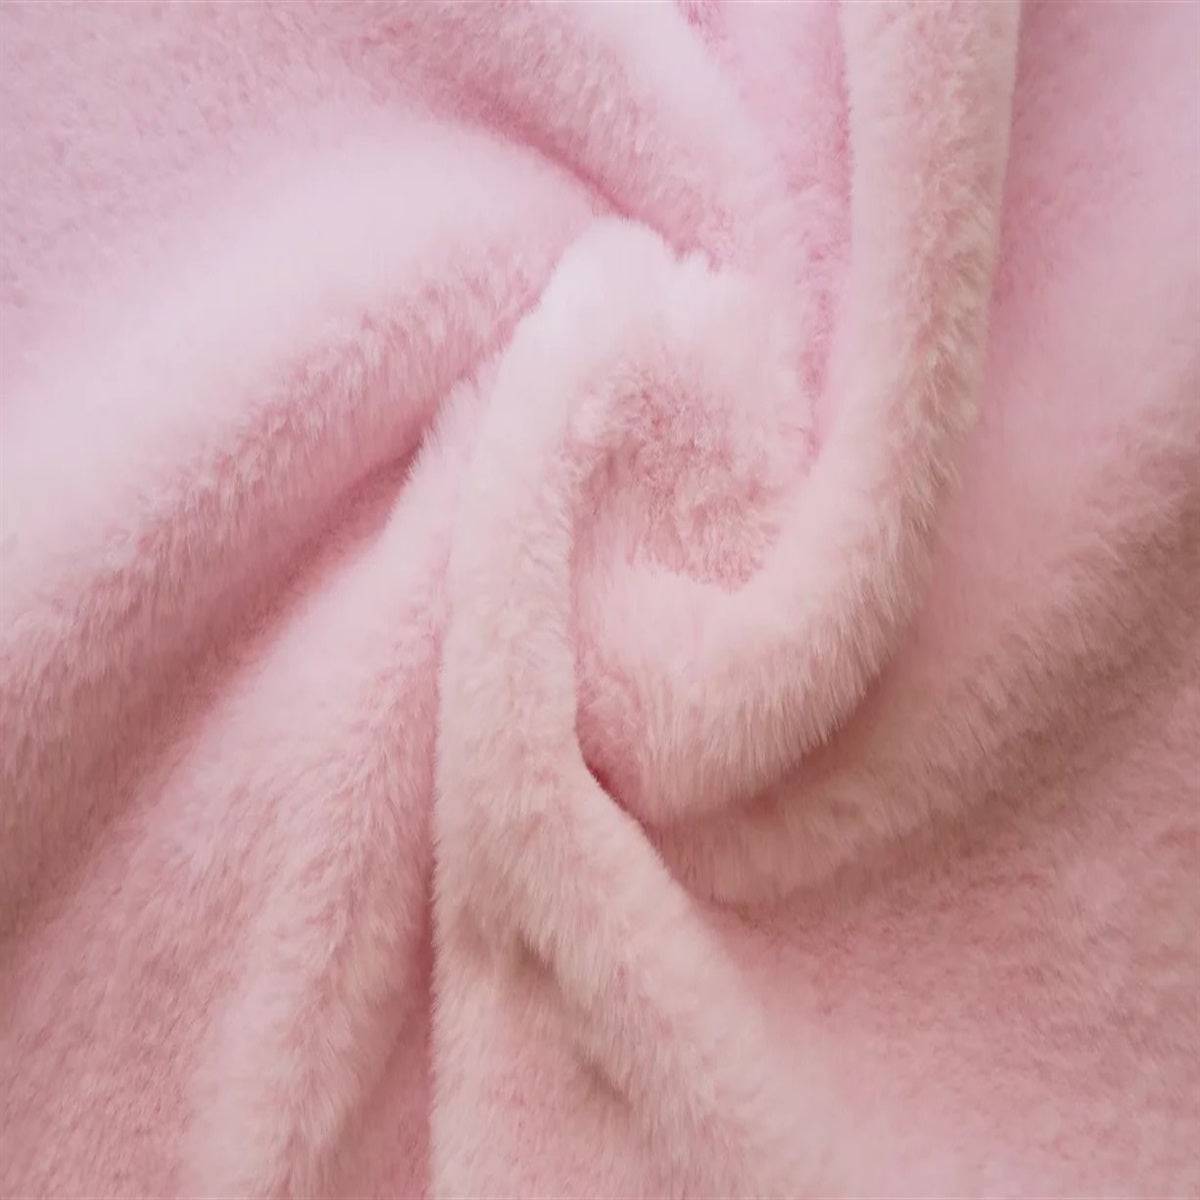 Bunny Thick Minky Fabric By The Roll (20 Yards)ICE FABRICSICE FABRICSPinkBy The Yard (60 inches Wide)Bunny Thick Minky Fabric By The Roll (20 Yards) ICE FABRICS Pink